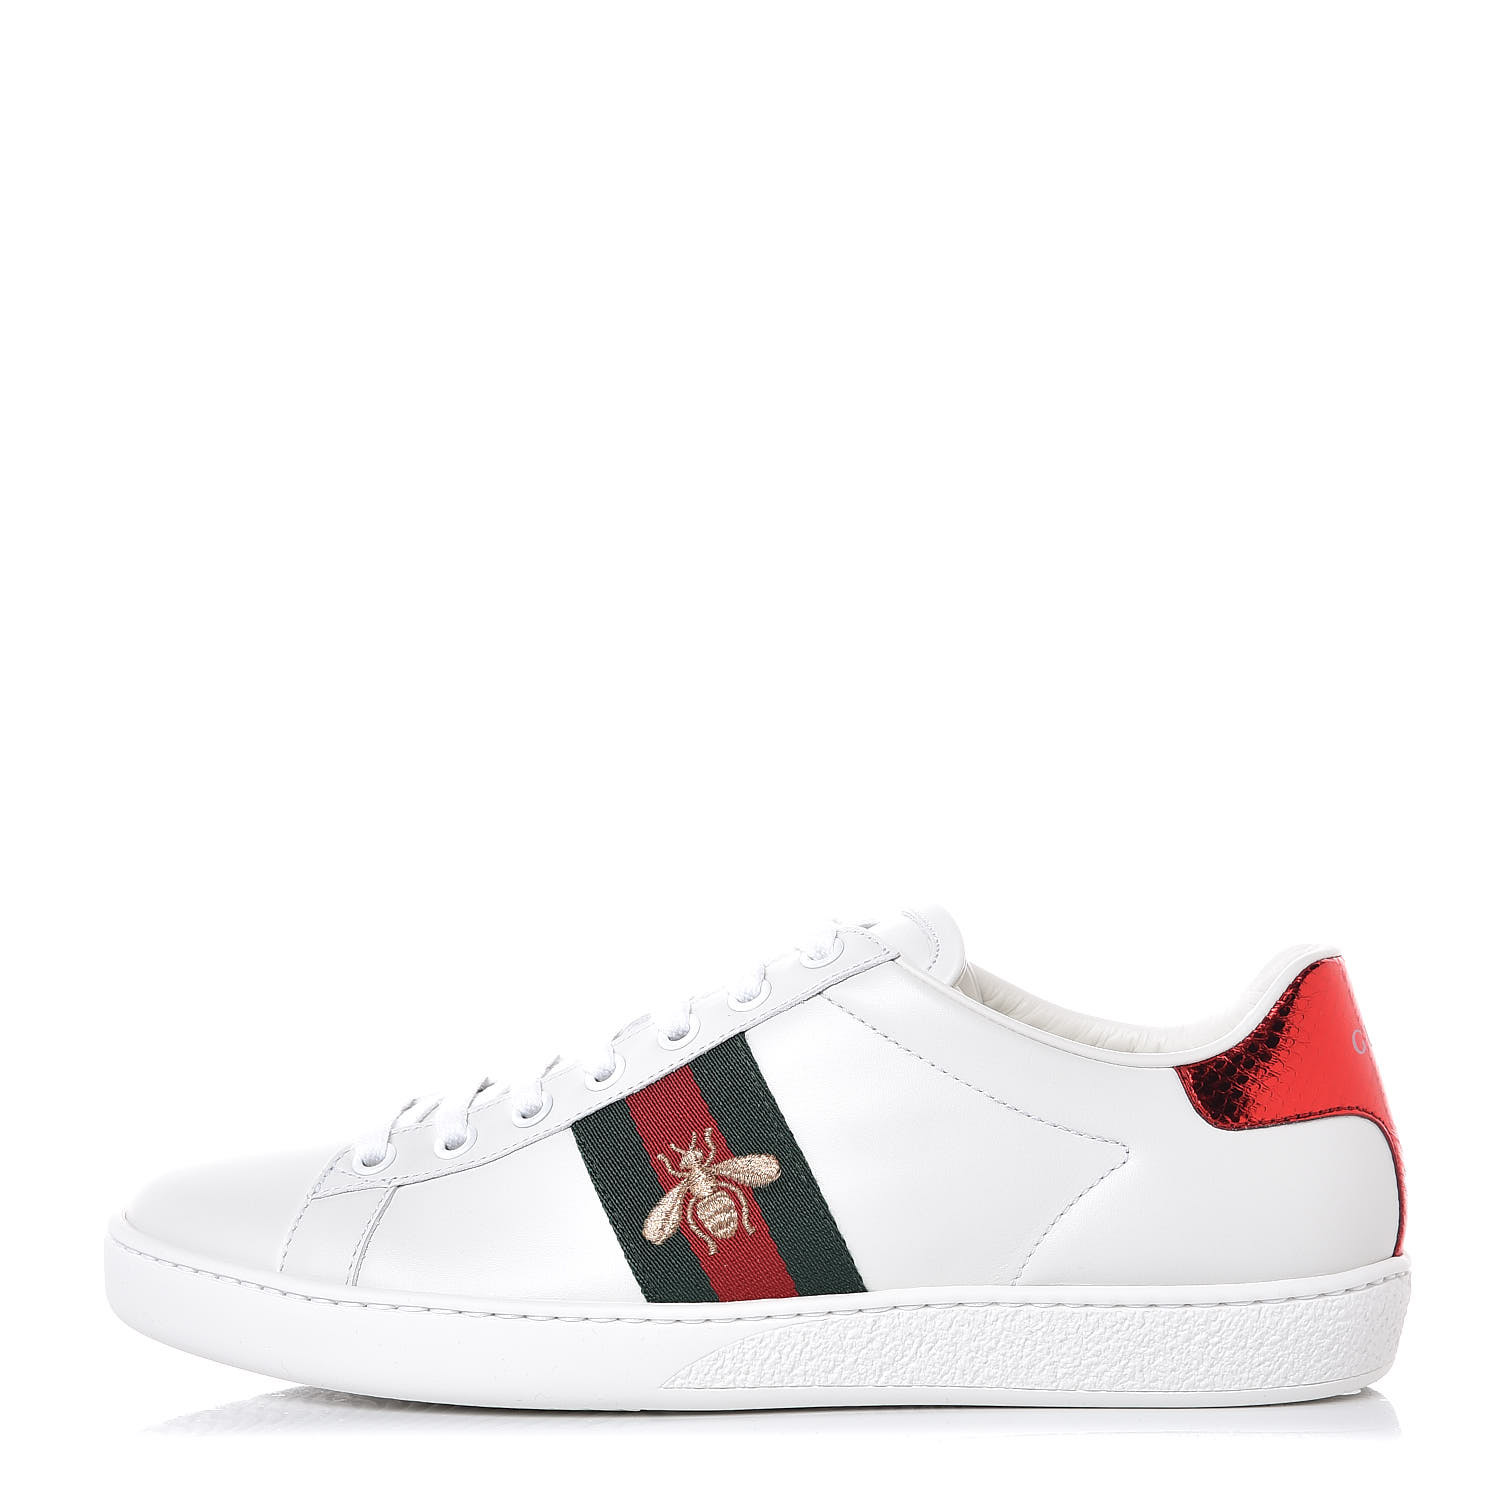 GUCCI Ayers Embroidered Ace Bee Star Sneakers 38 White Green 360873